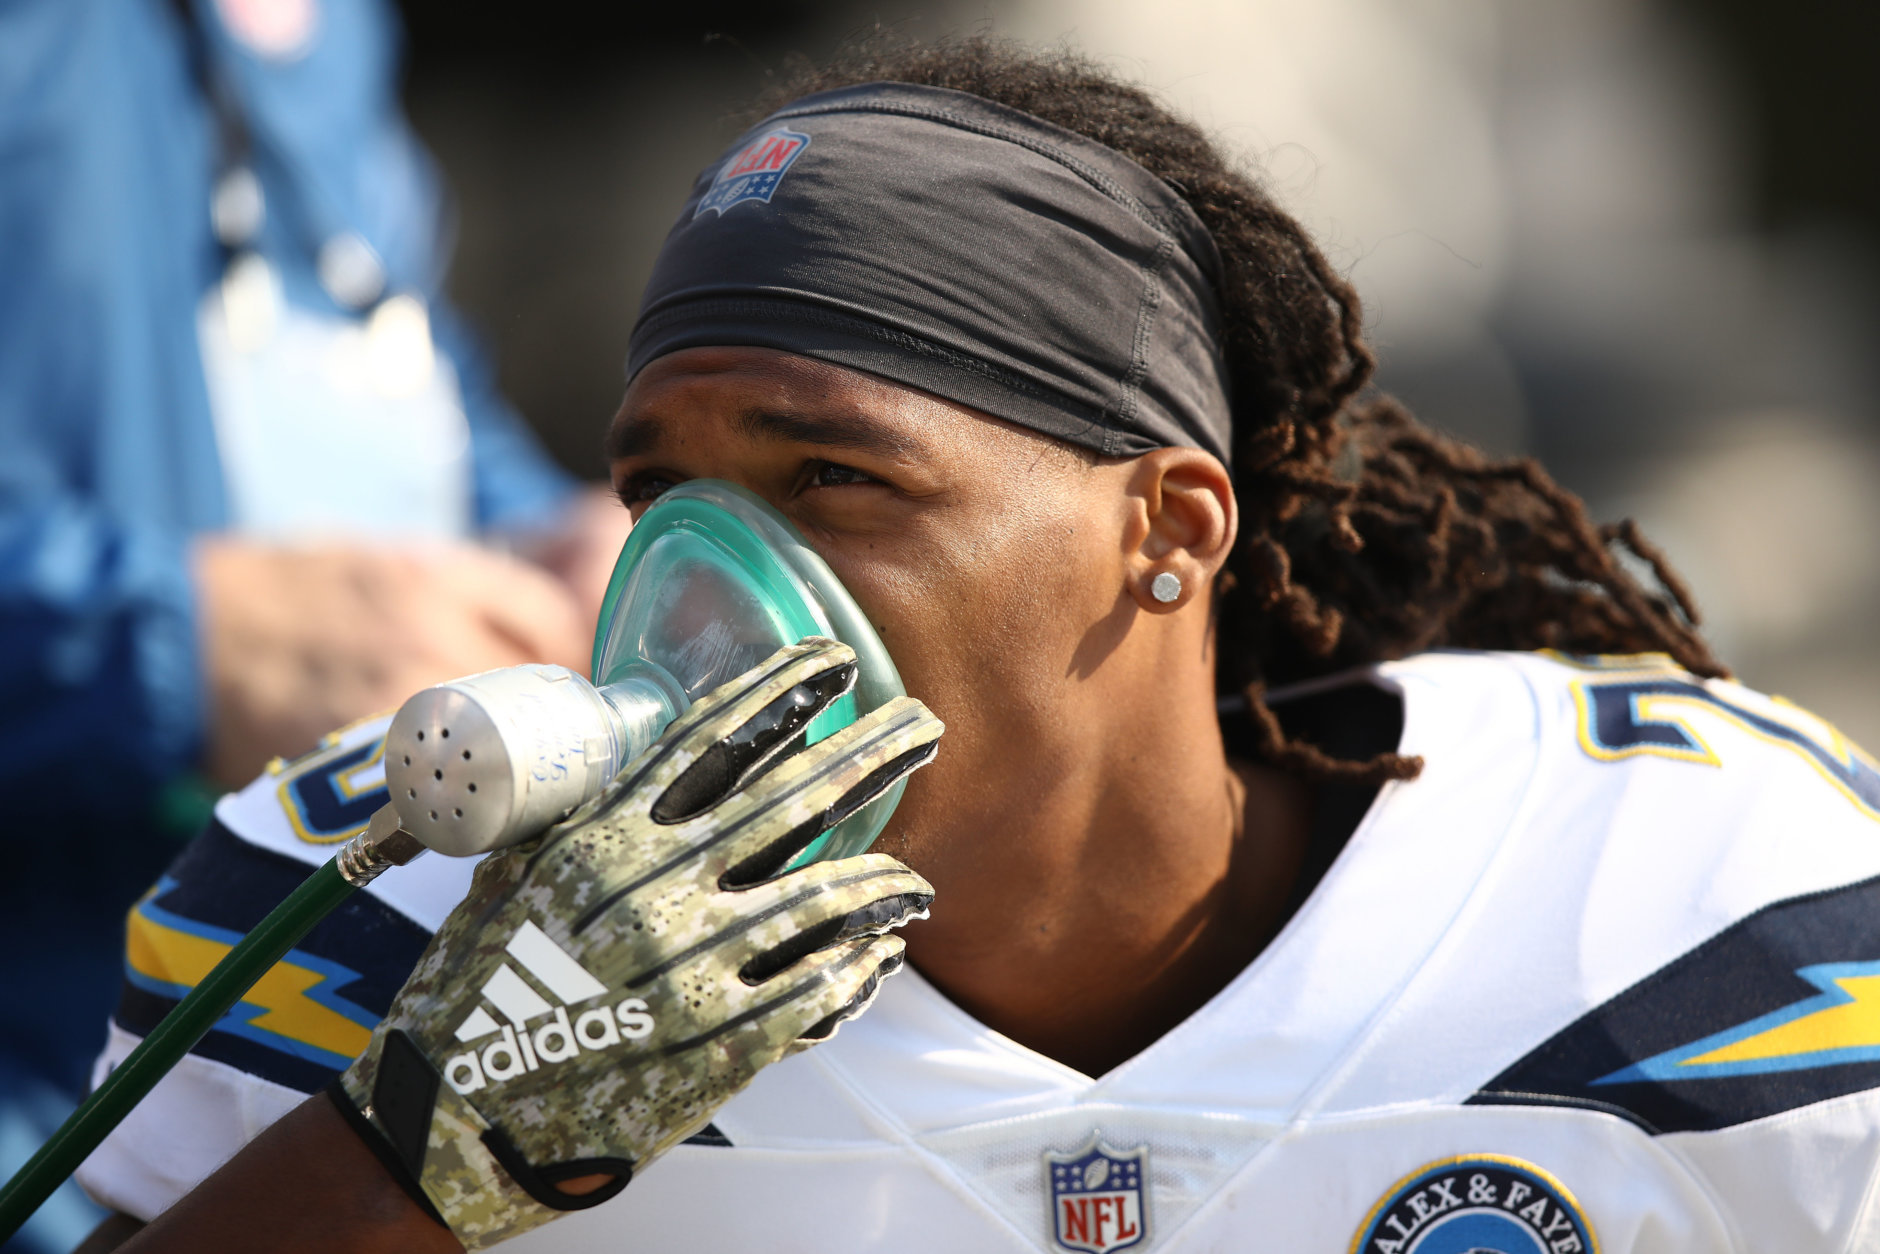 OAKLAND, CA - NOVEMBER 11: Rayshawn Jenkins #23 of the Los Angeles Chargers breathes from an oxygen tank during their NFL game against the Oakland Raiders at Oakland-Alameda County Coliseum on November 11, 2018 in Oakland, California. An Air Quality Advisory was issued due to heavy wildfire smoke in parts of the Bay Area from the Camp Fire in Butte County. (Photo by Ezra Shaw/Getty Images)